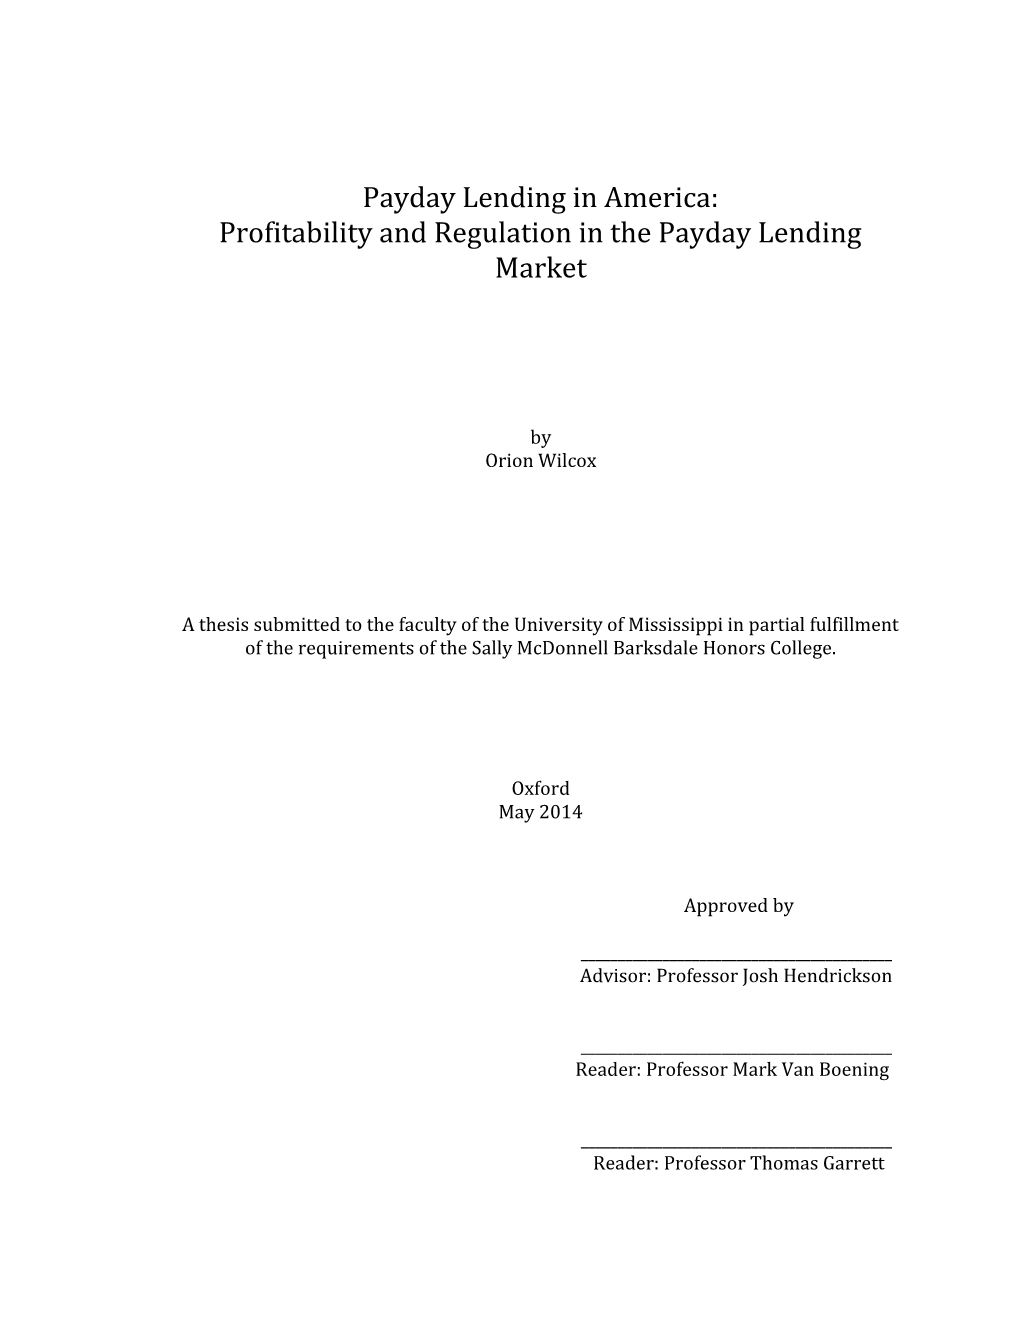 Profitability and Regulation in the Payday Lending Market